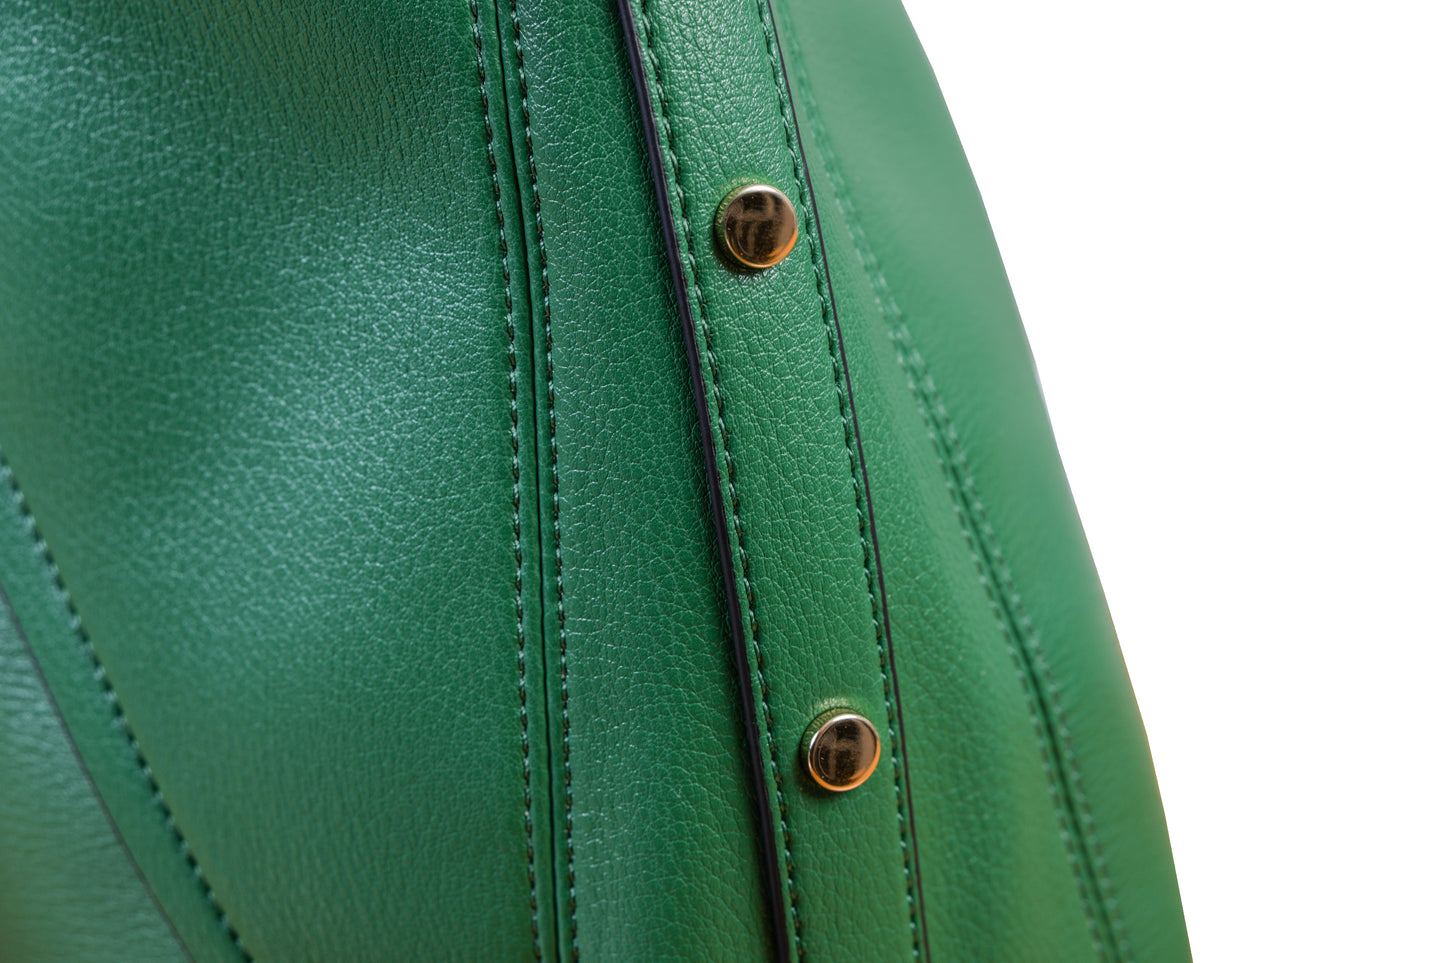 Luna Green Crescent Pebble Grain Faux Leather Handbag made by Dewi Maya detail photo of gold rivets available at the best boutique in Upstate South Carolina Spartanburg Greenville Dewi Maya Boutique